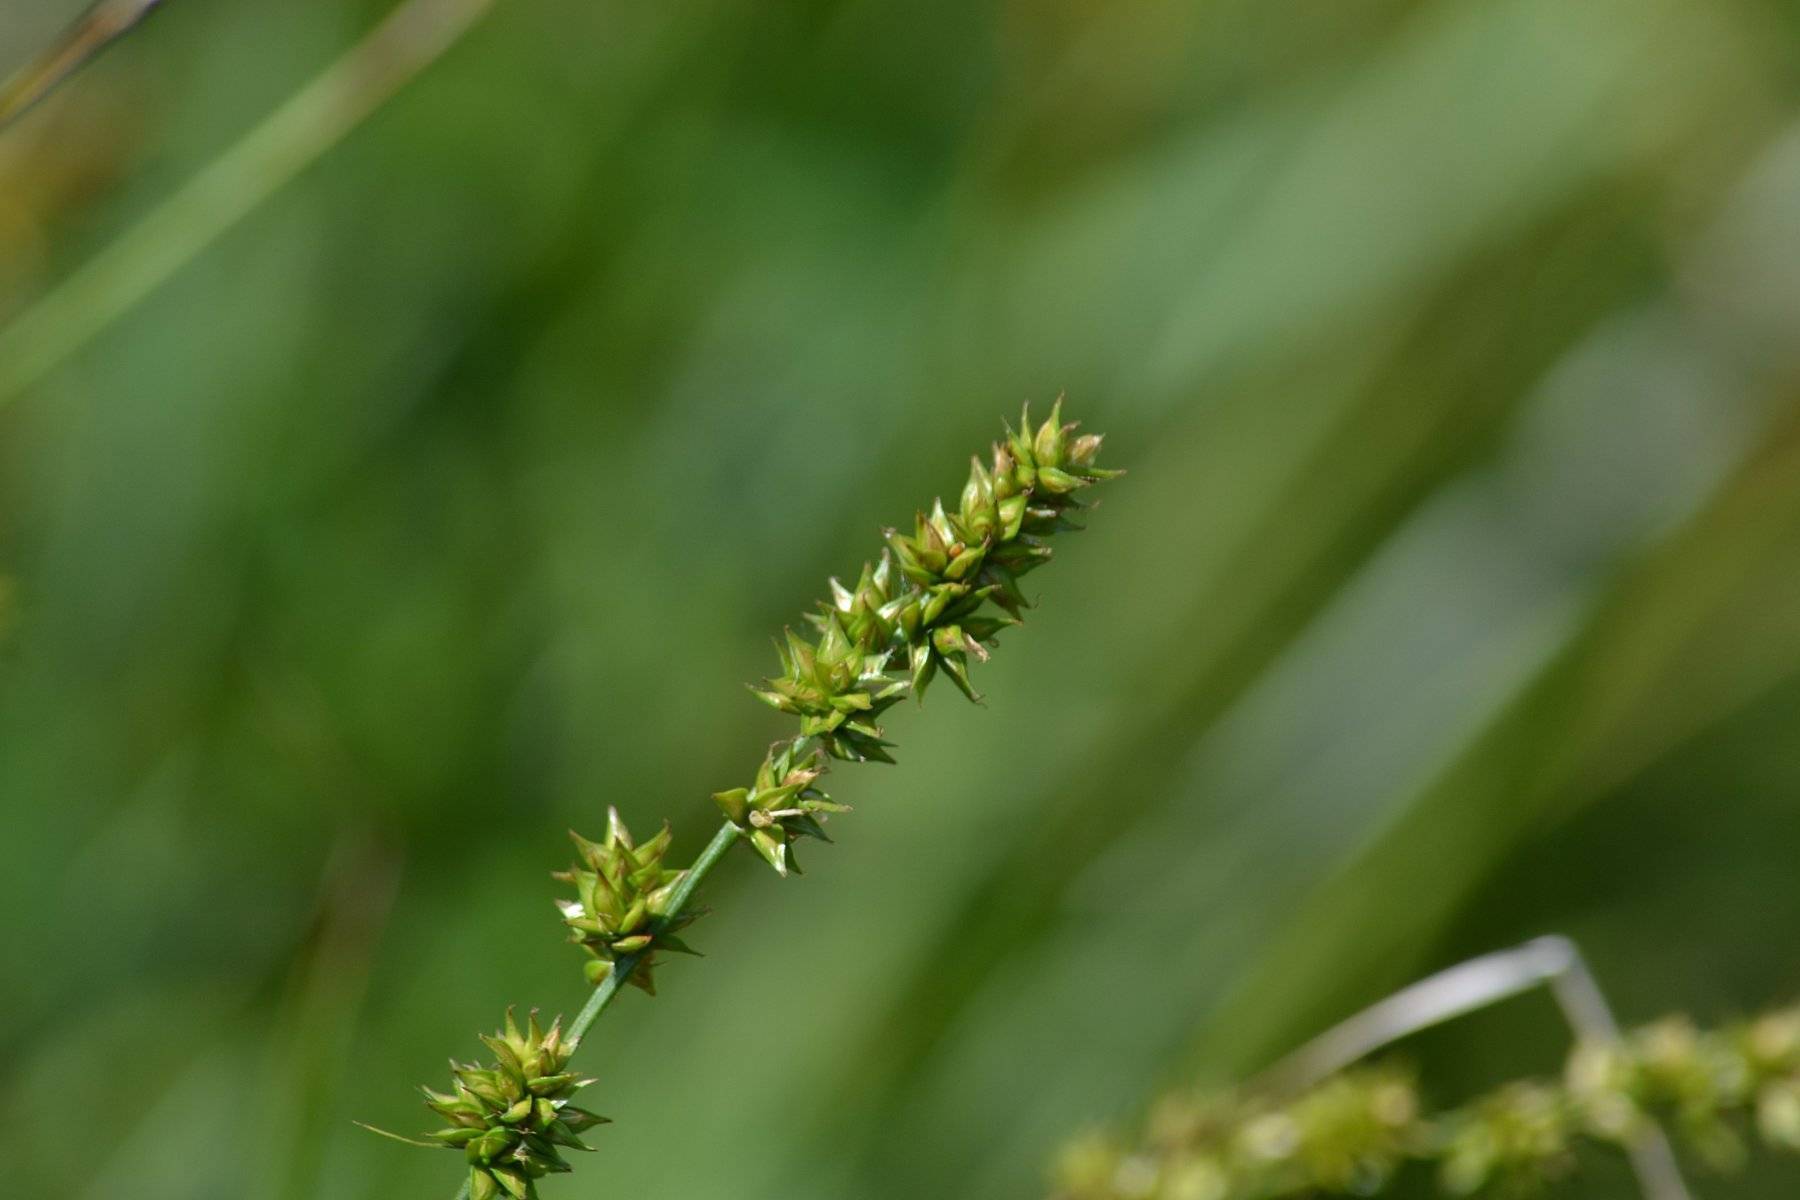 olive-lime spikelets with green stem